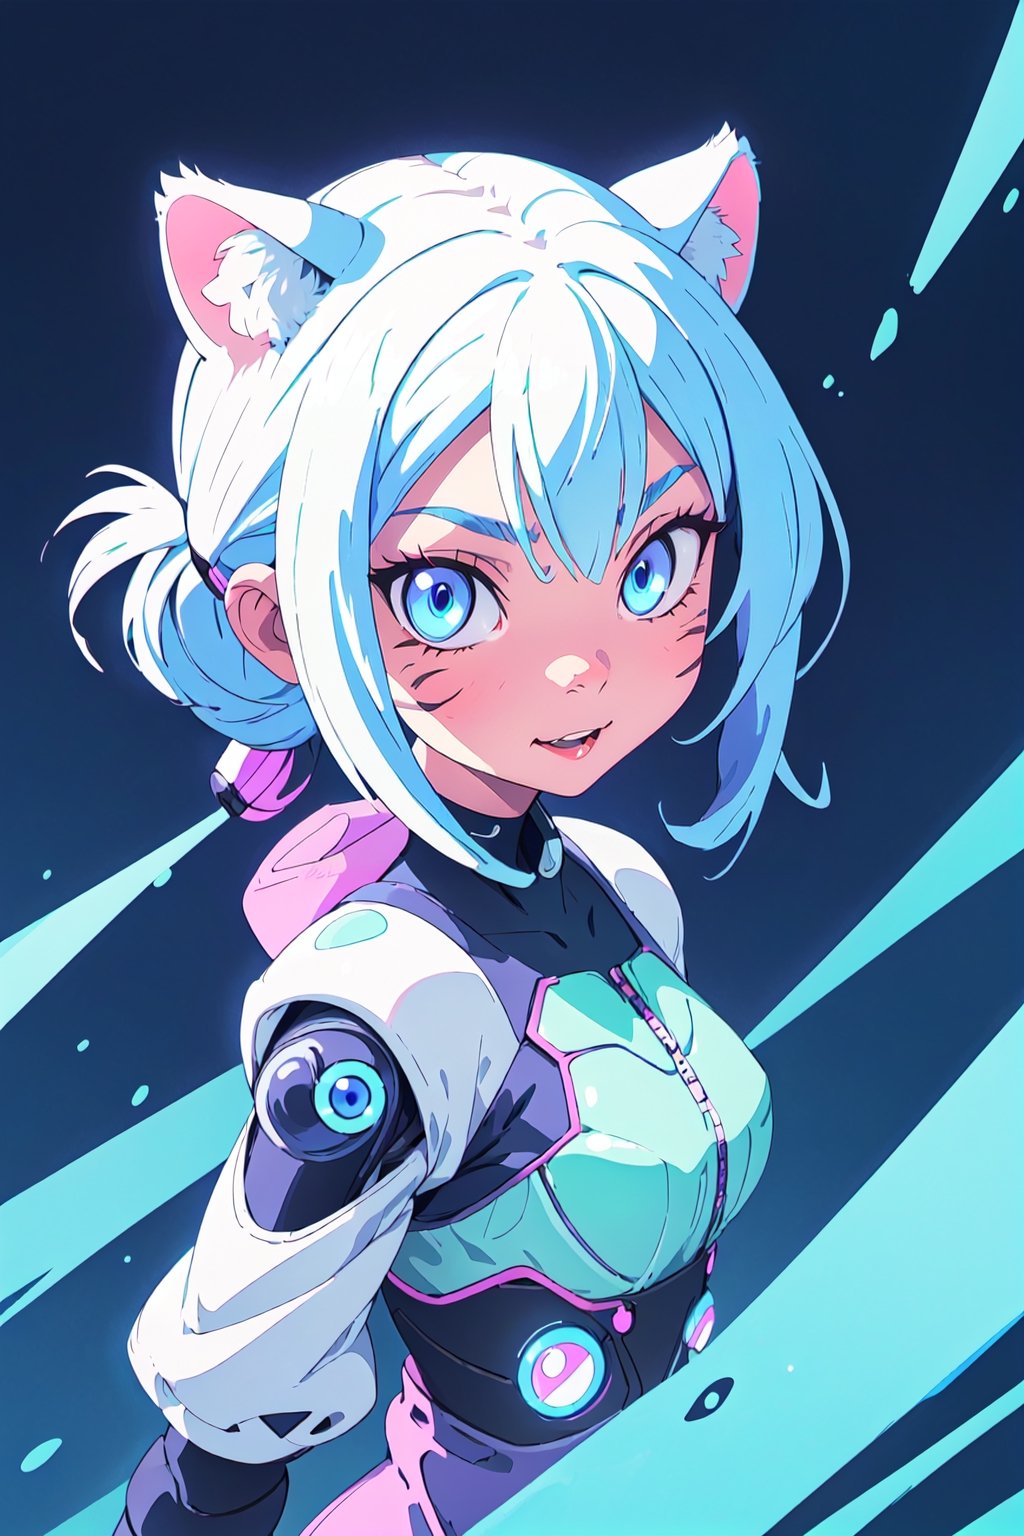 1 girl, blue, cian, white, 1 animal tiger and dog and cat like, long dragon, furry, digital details, simple background, blue eyes, locking at viewer, anime style, cute, cartoon style, happy, playfull, dynamic, cybernetic, cyberpunk, neon, magic particules, friendly, mascot, chibi:1.7, 4k quality, digital, beauty